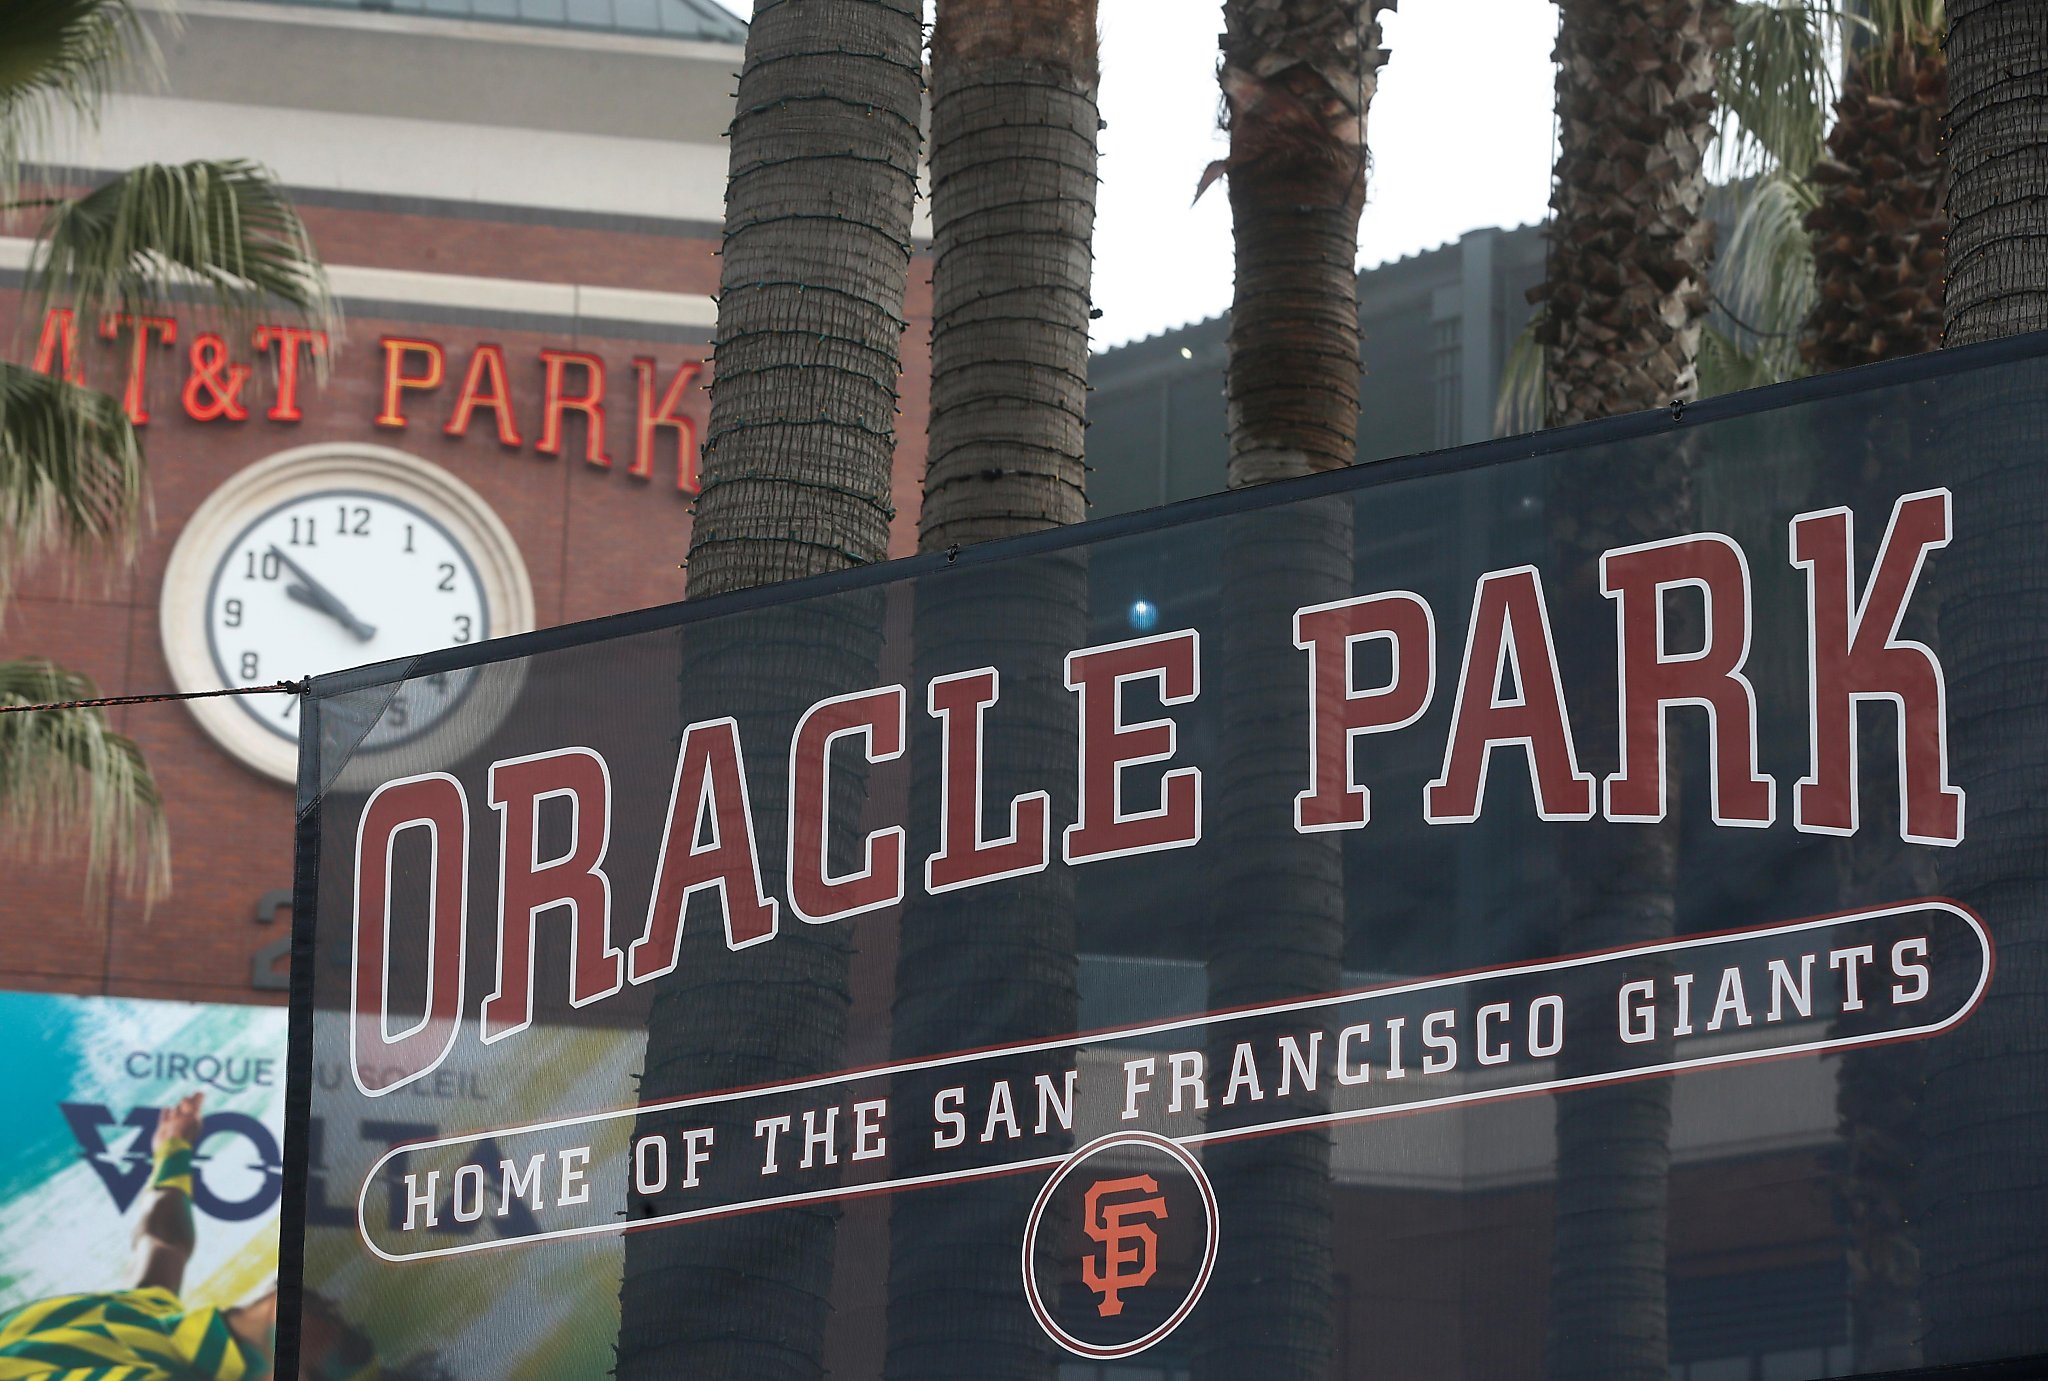 Oracle Park? Here’s what Giants fans will really call it - SFChronicle.com